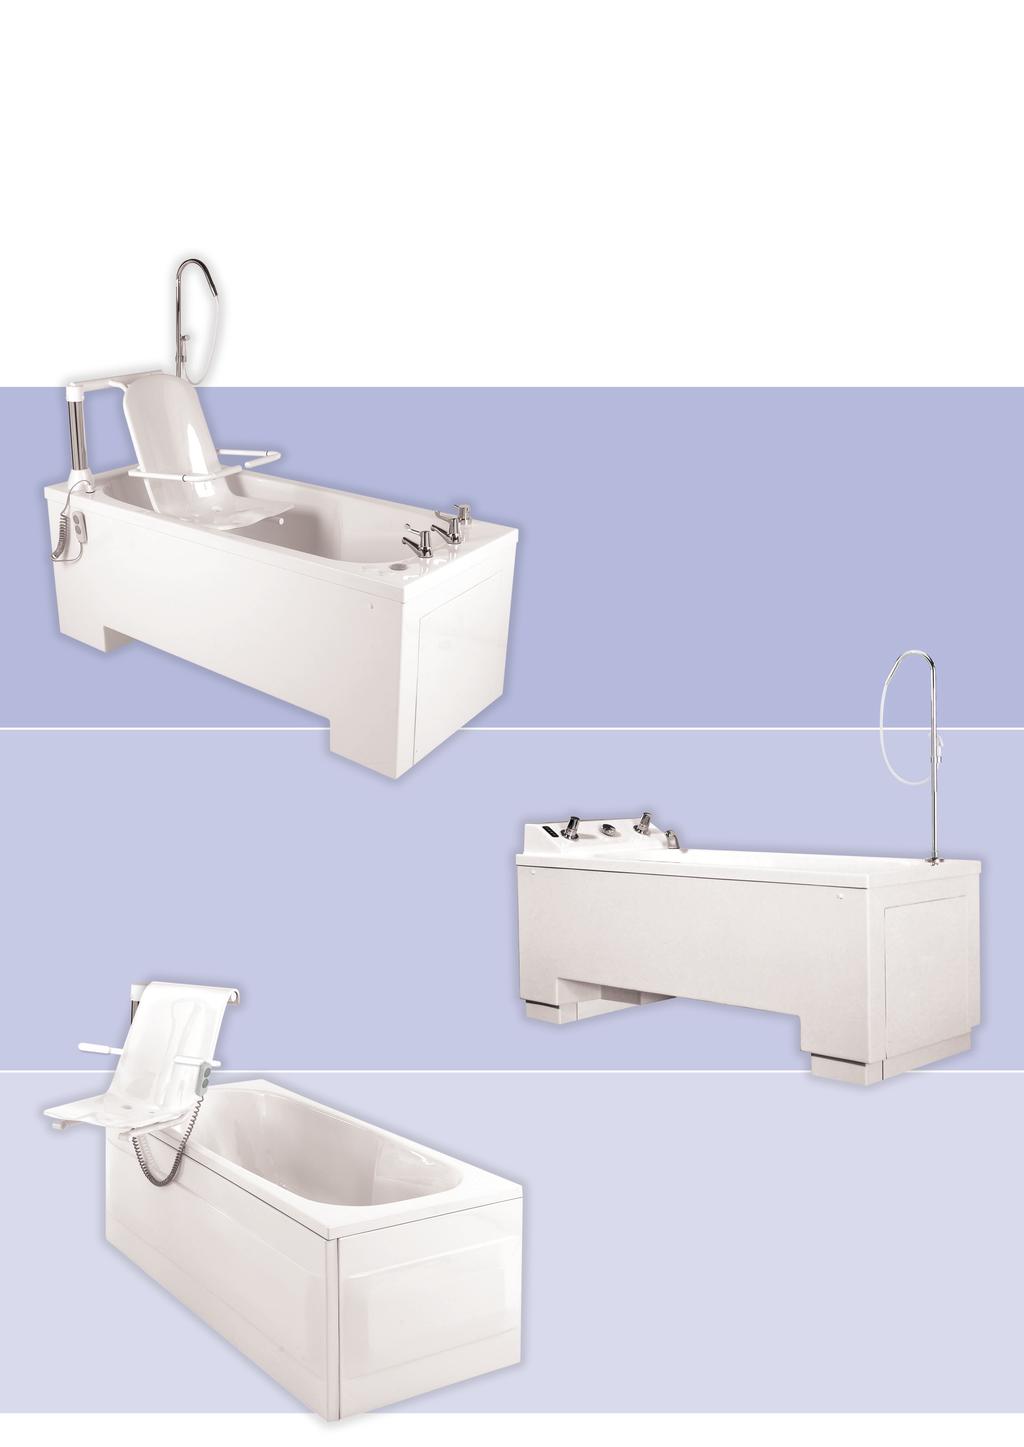 the Professional Range Integrated bathing systems by Gainsborough Baths Gainsborough is the largest manufacturer of specialist baths in the world.